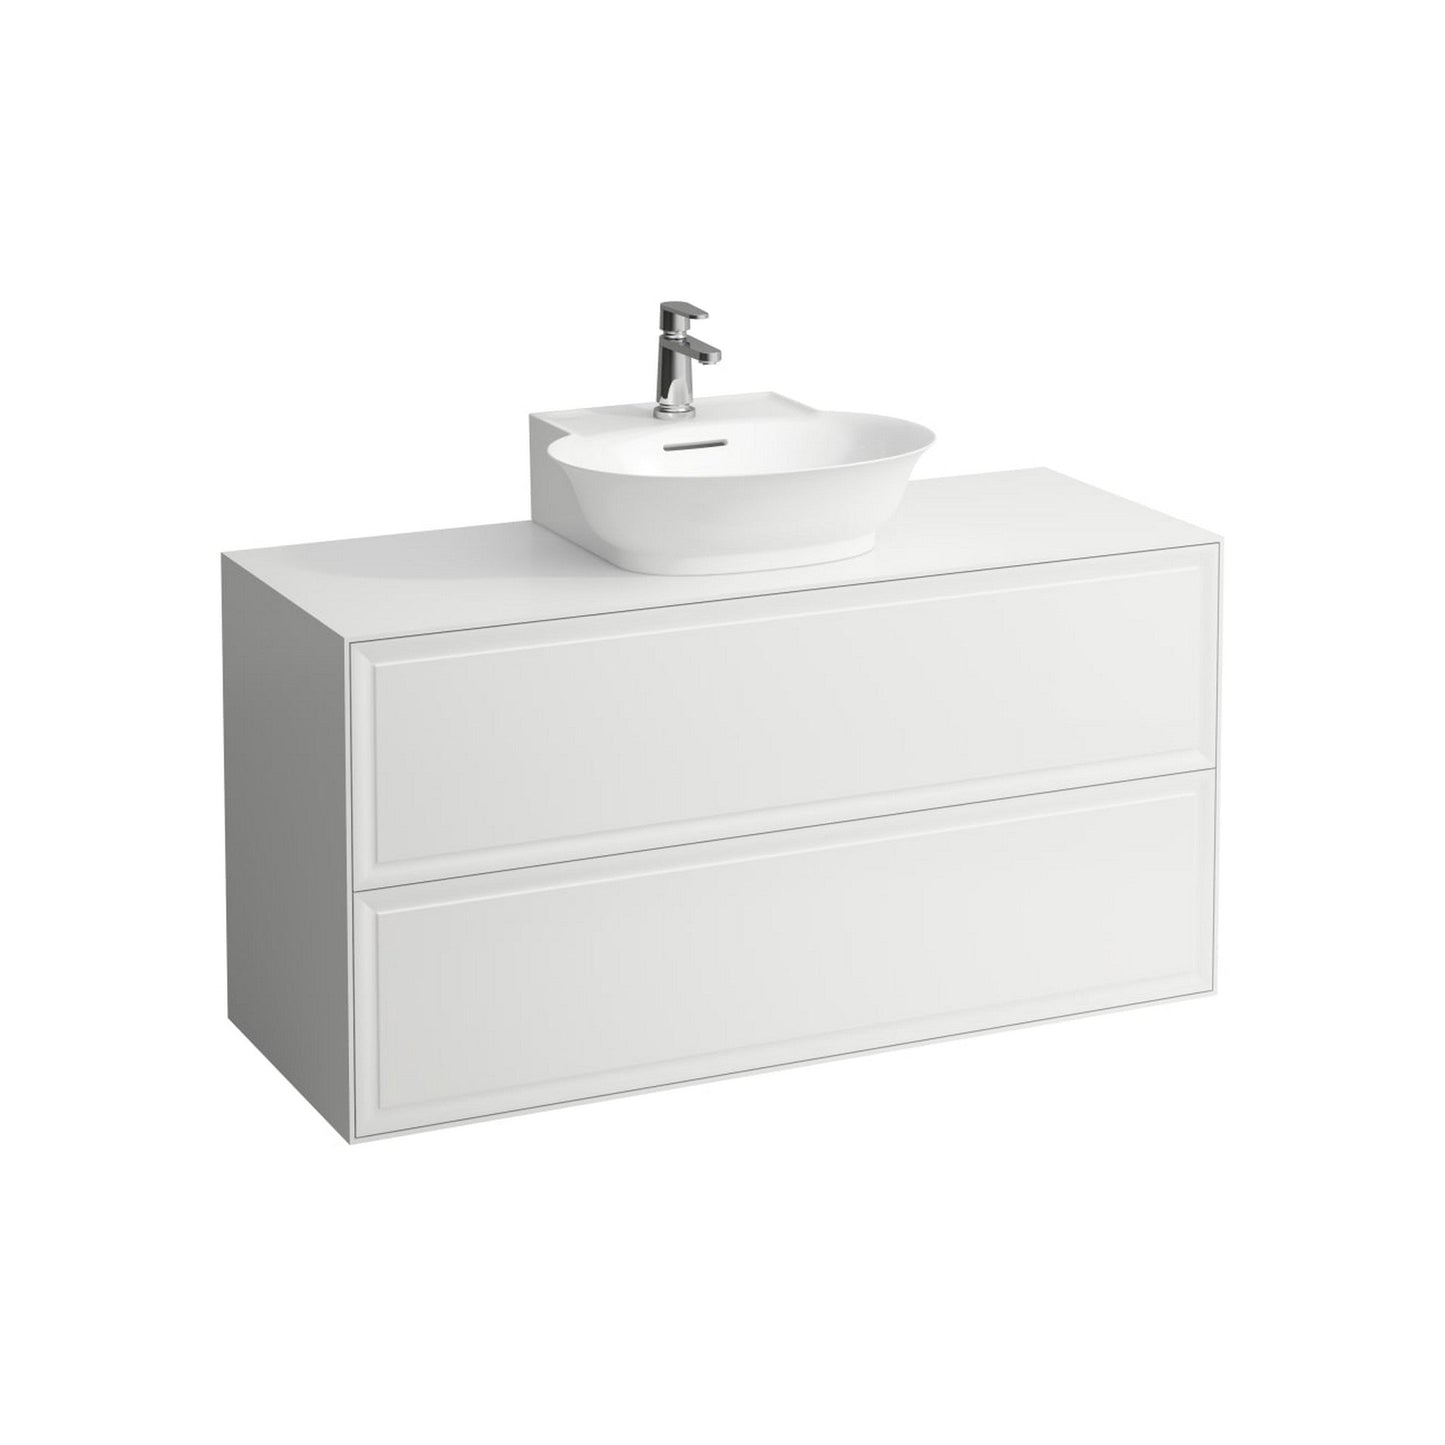 Laufen New Classic 46" 2-Drawer Matte White Wall-Mounted Vanity for New Classic Bathroom Sink Model: H816852